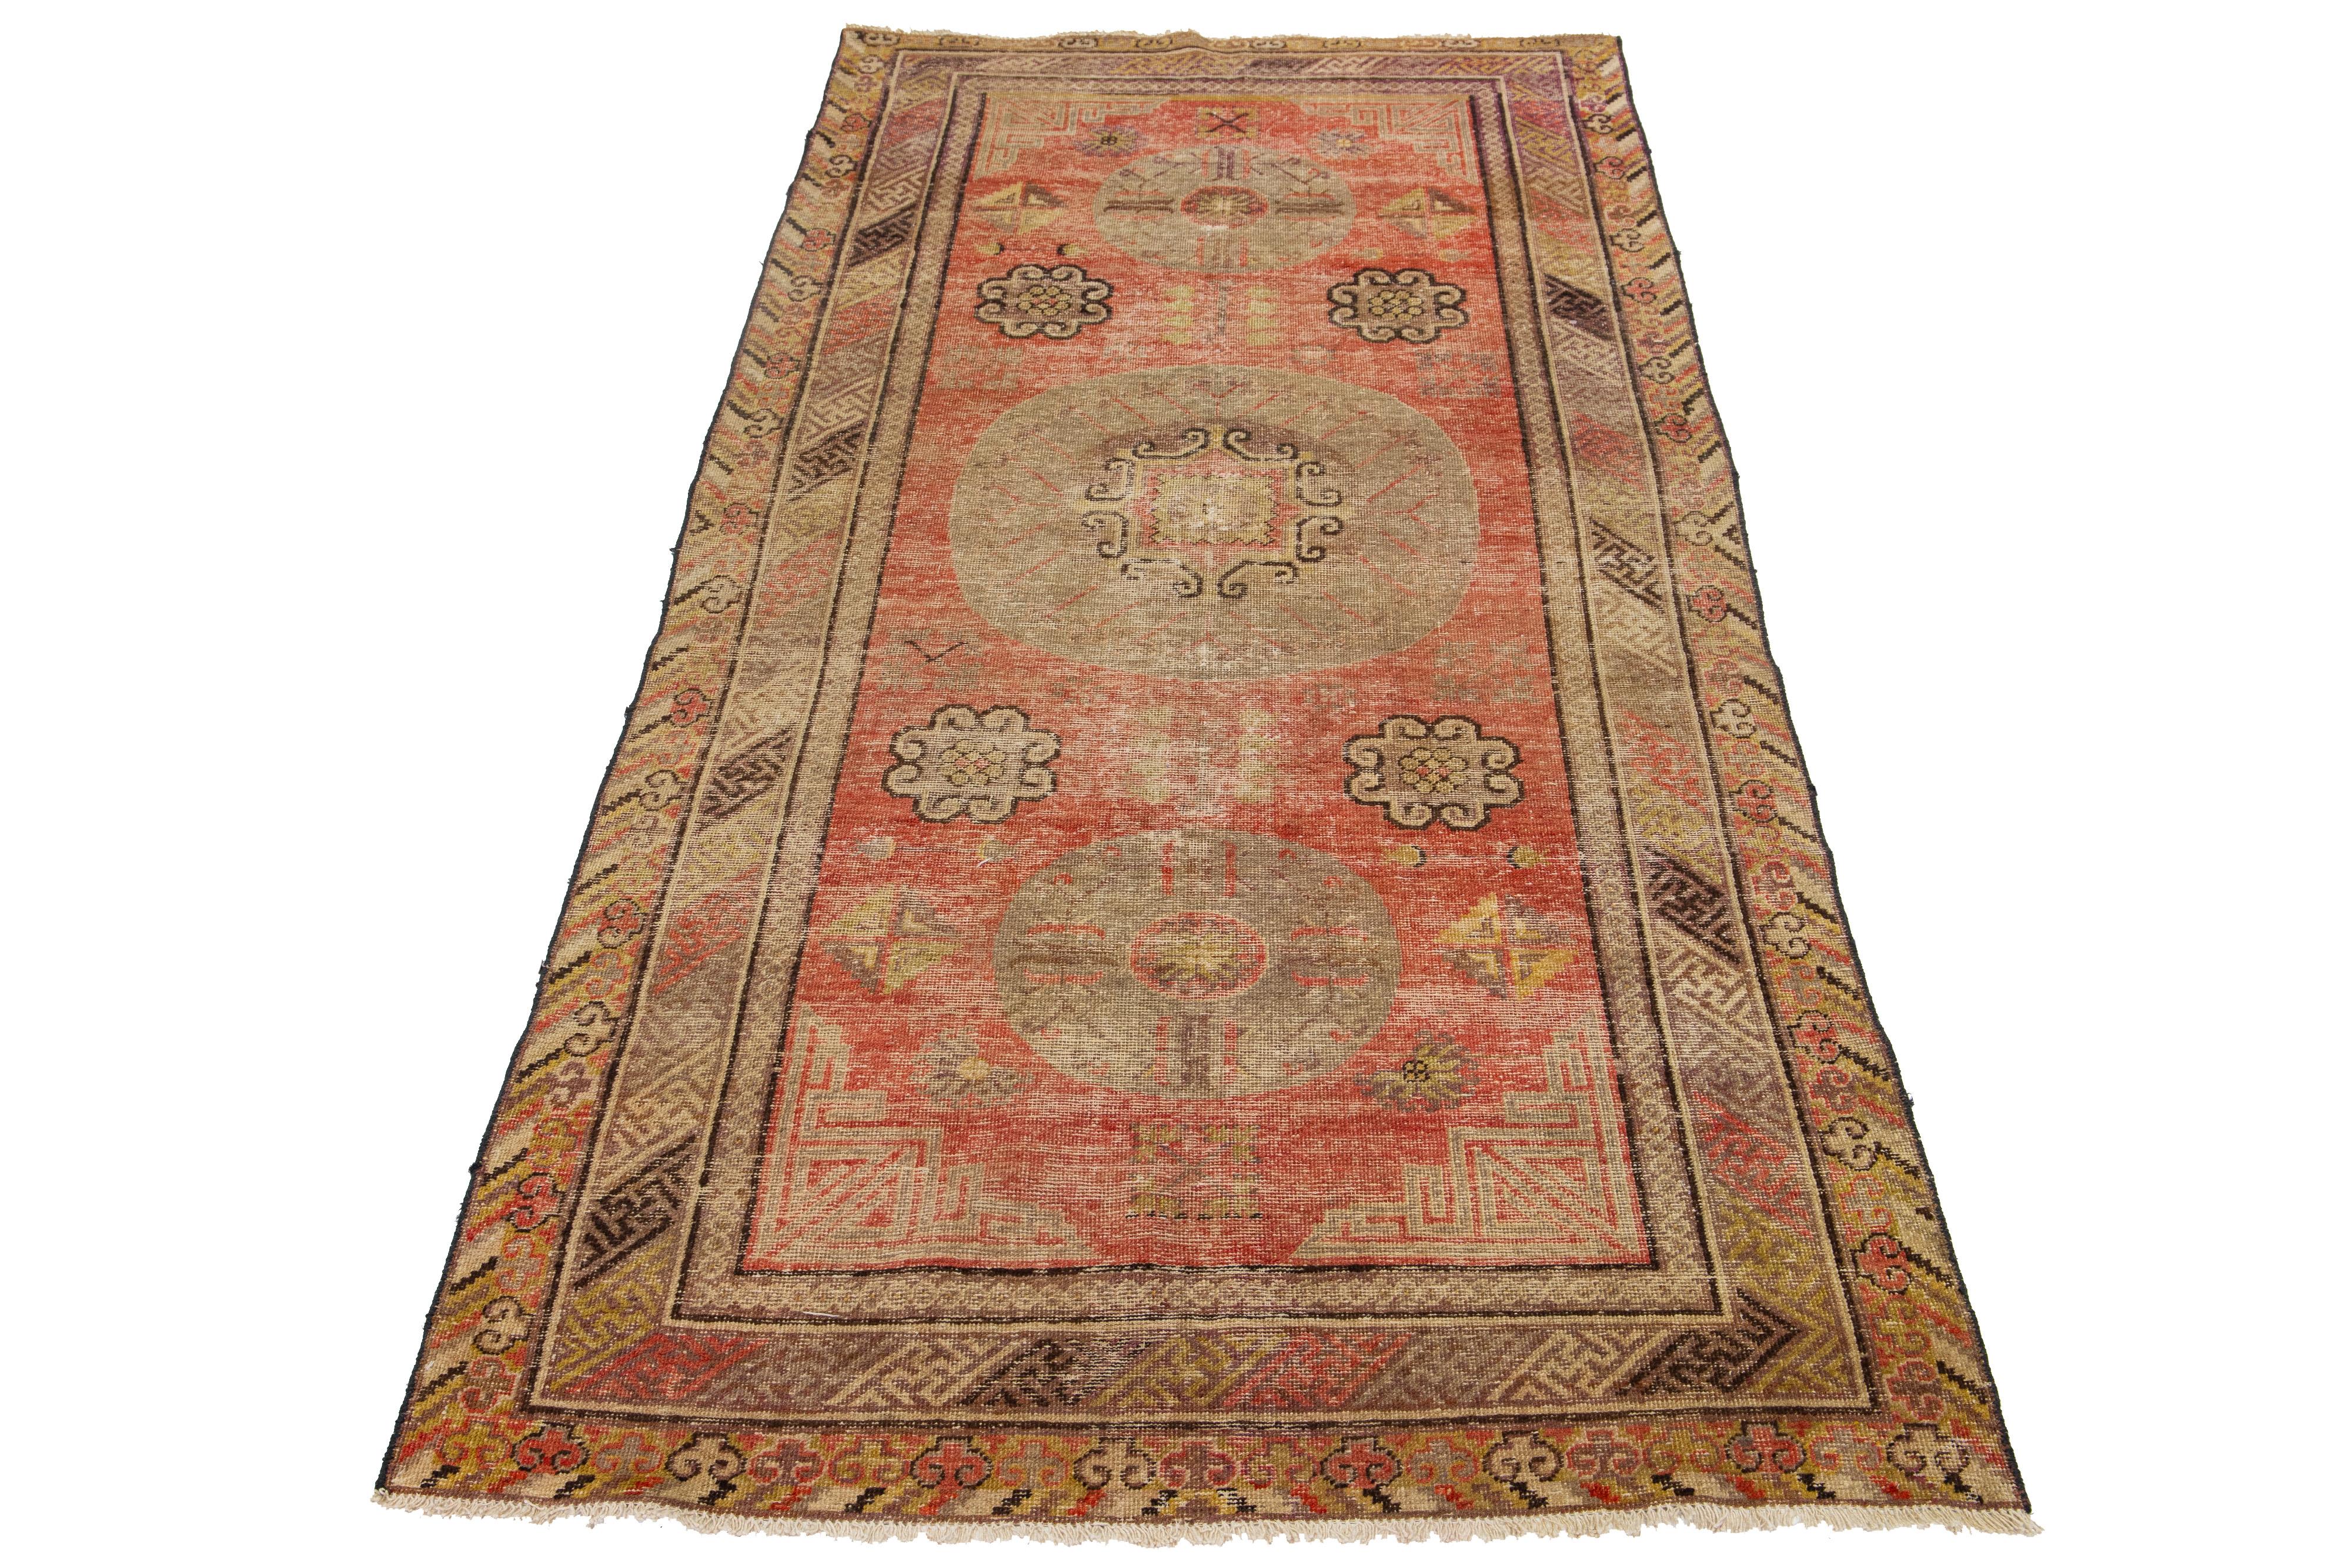 Beautiful Antique Khotan hand-knotted wool rug with an orange color field. This Khotan has multicolor accents in a gorgeous all-over medallion floral motif.

This runner measures 4'4